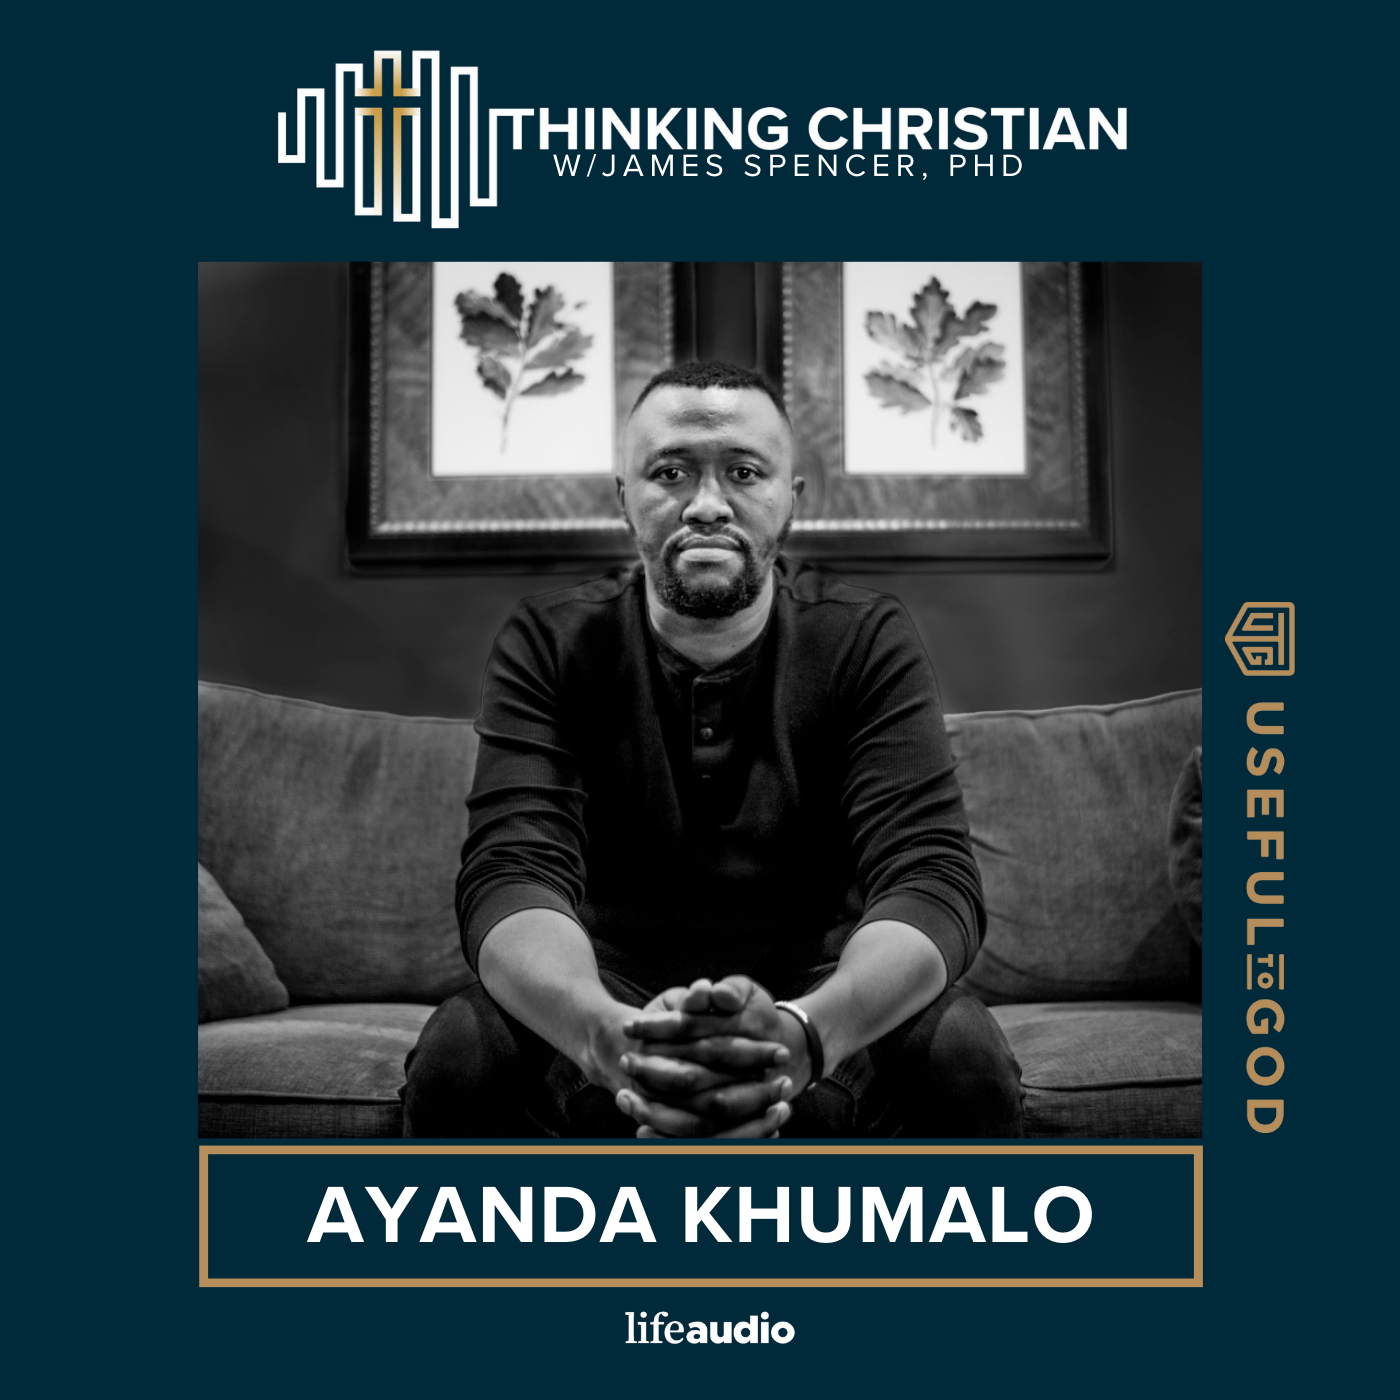 How Should Chrisitans Think about Worship? A Conversation with Ayanda Khumalo, Part 1